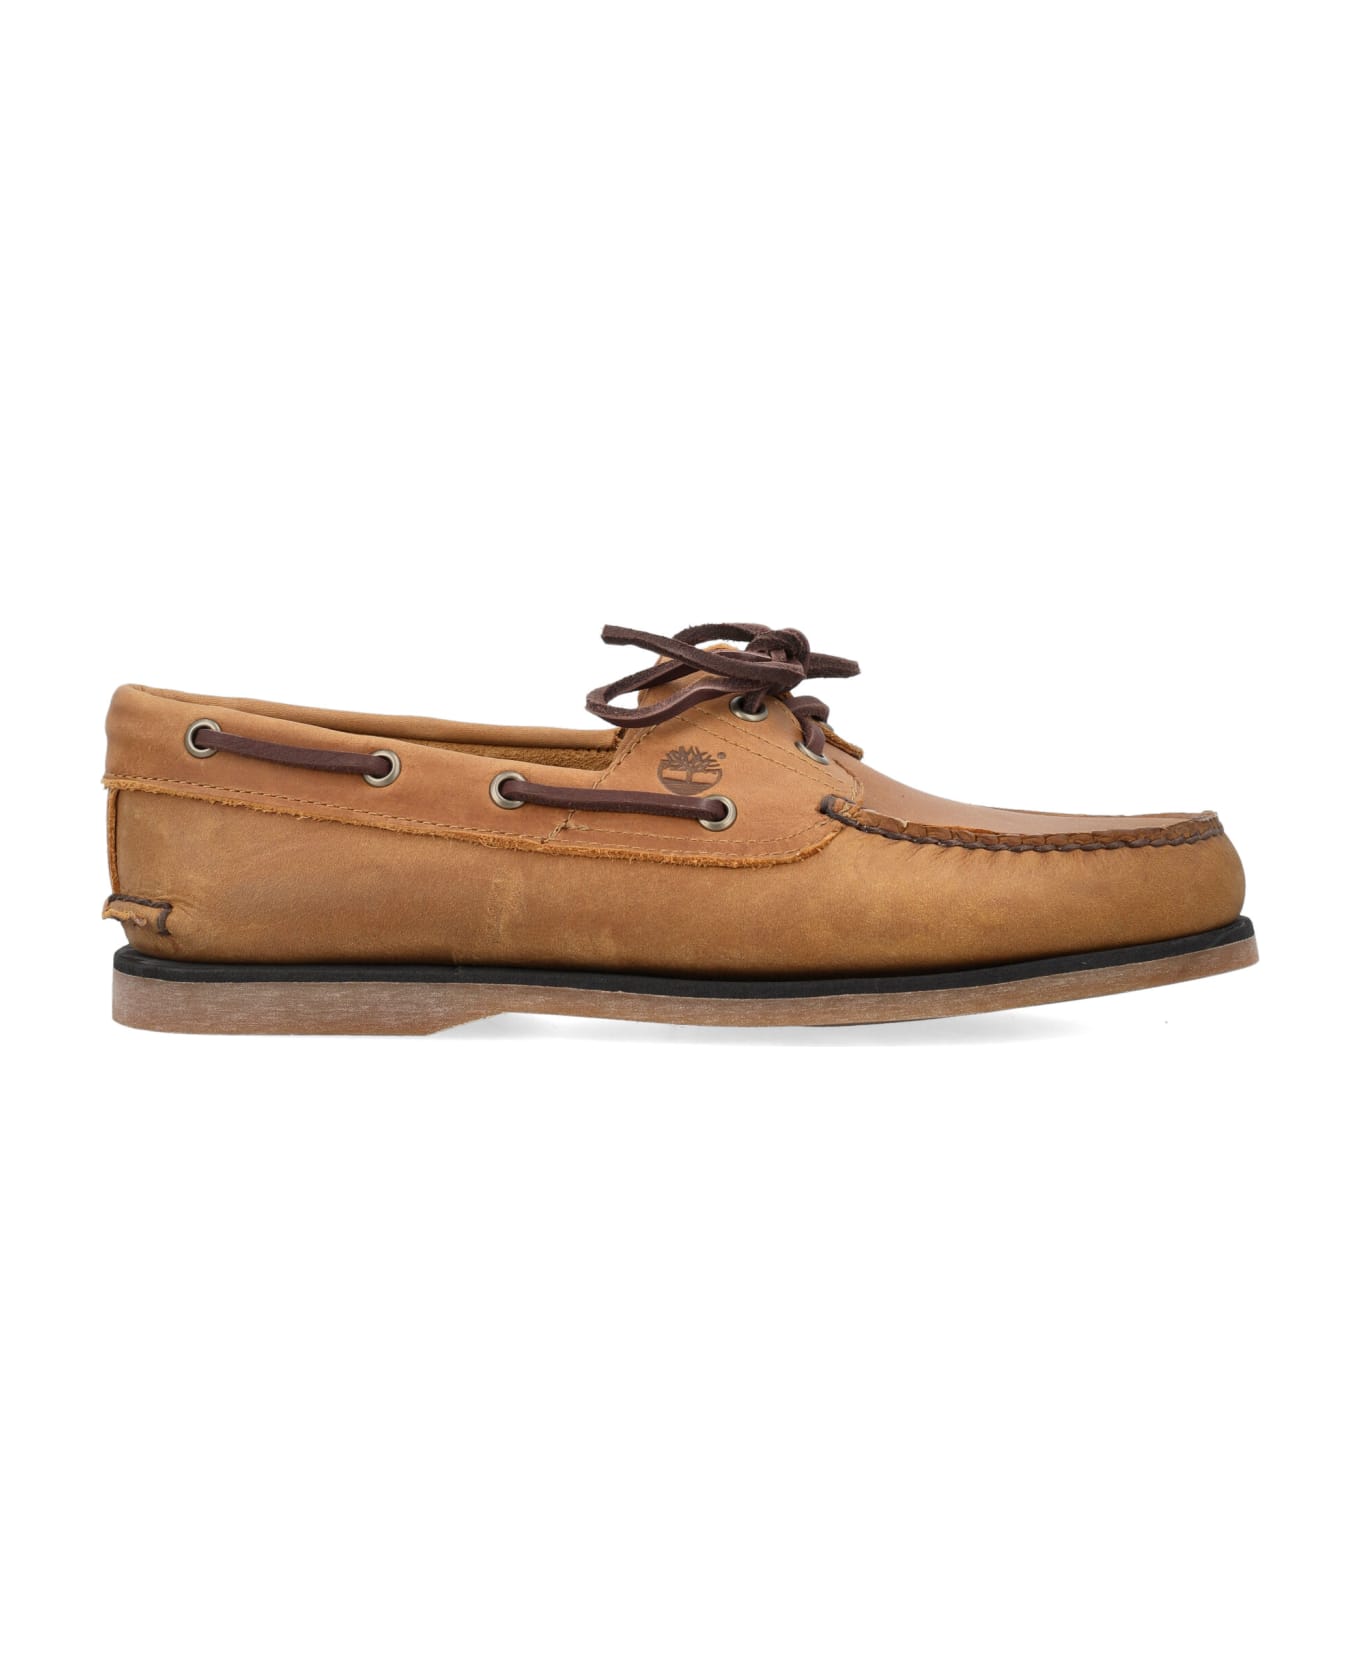 Timberland Classic Boat Loafer - WHEAT